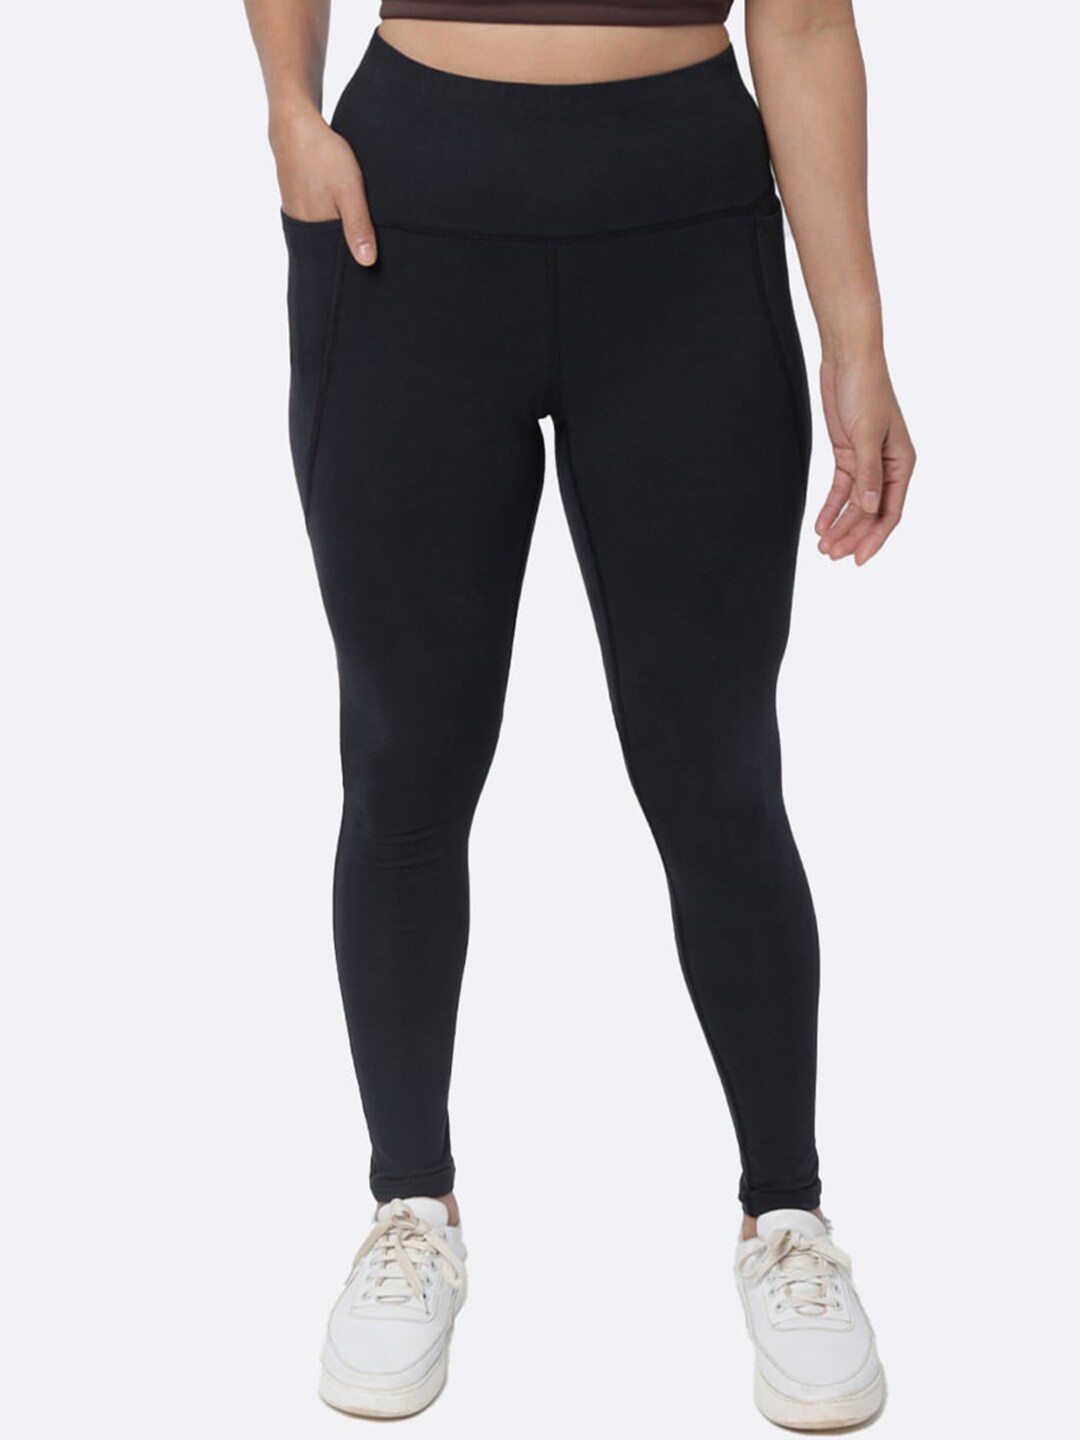 BlissClub Women Solid Tights Price in India